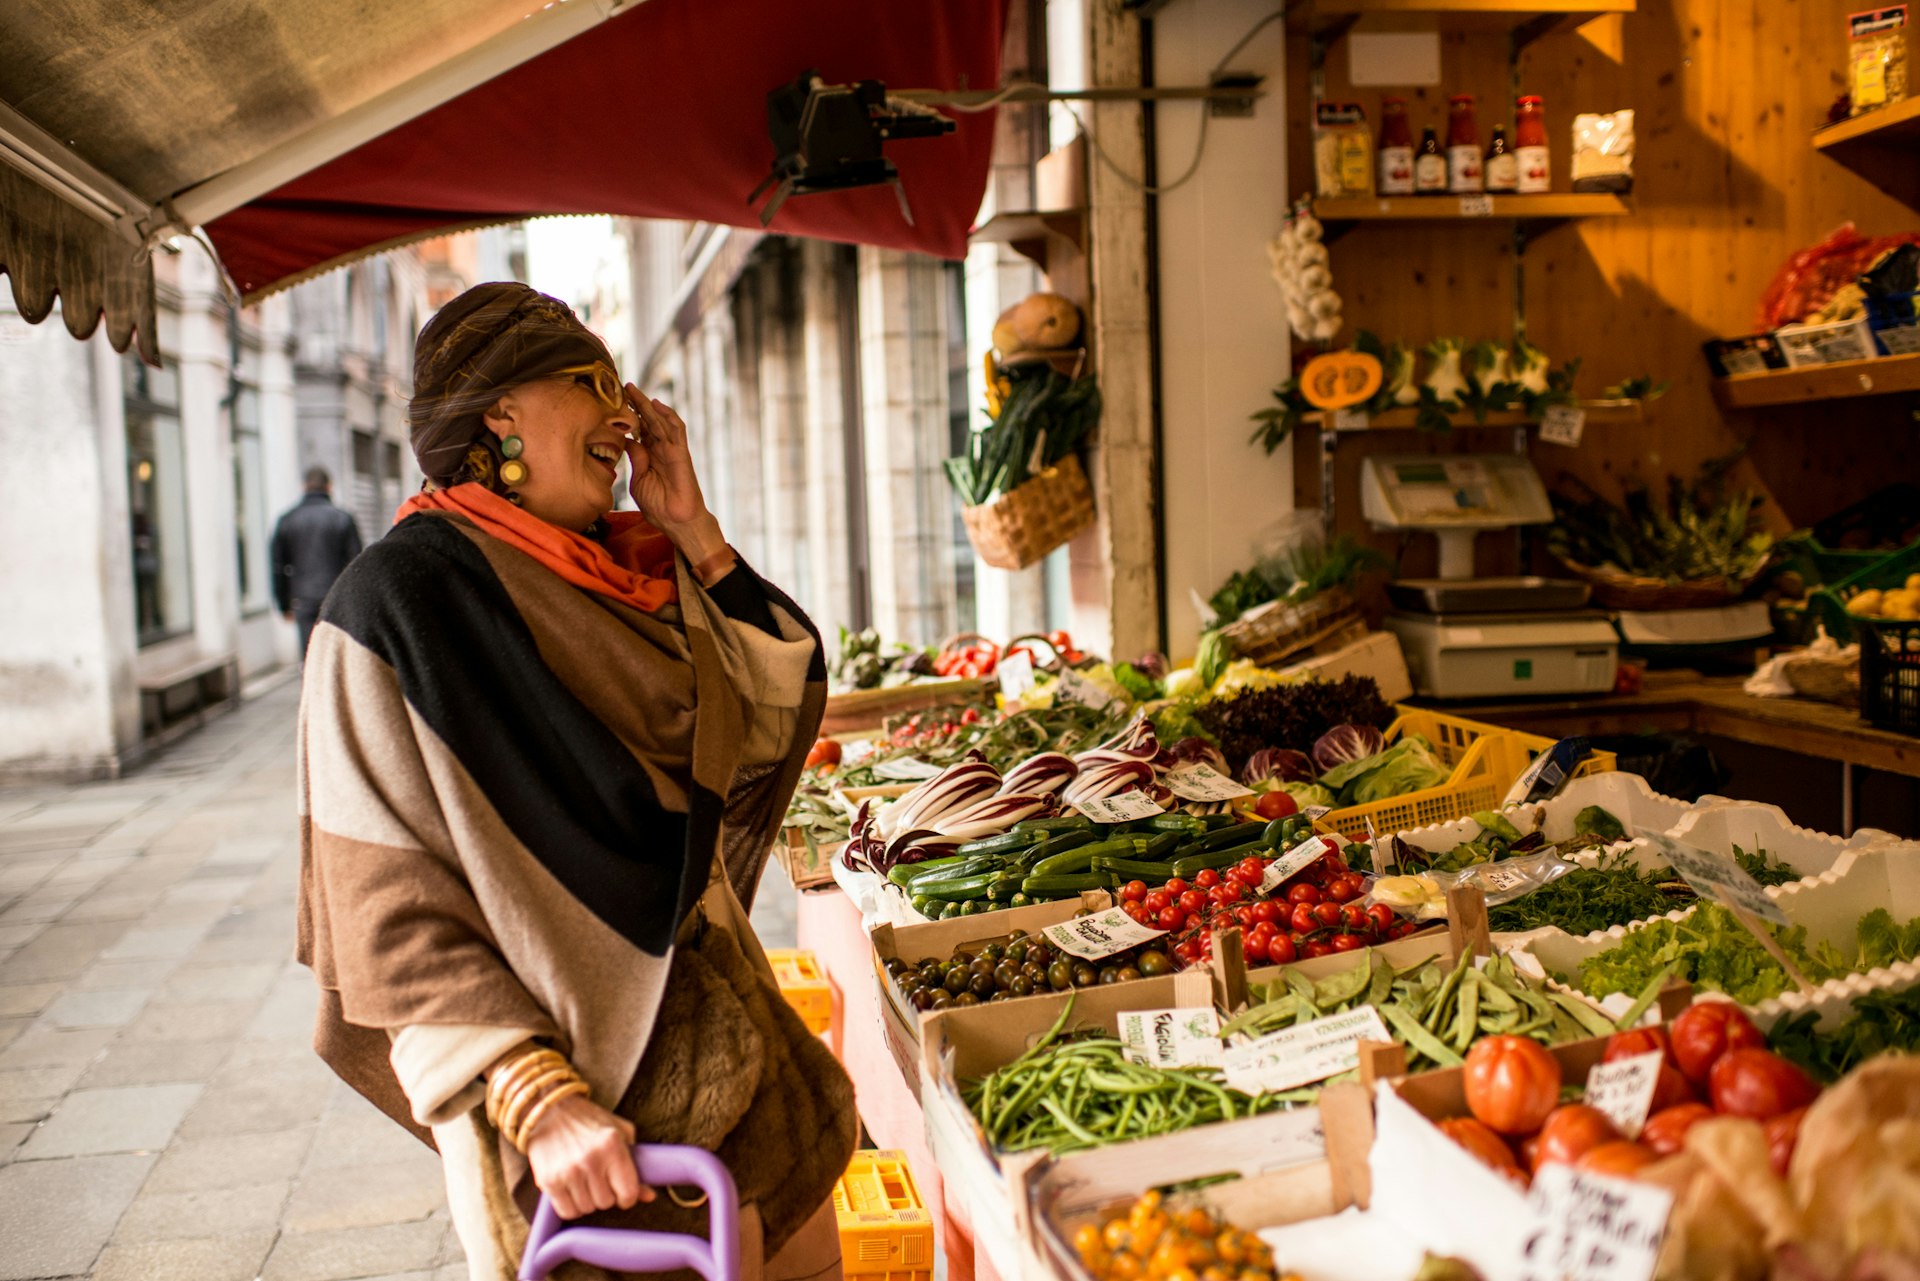 An older woman, dressed in winter clothes and wearing a turban, is smiling at the grocery market stall in Venice.